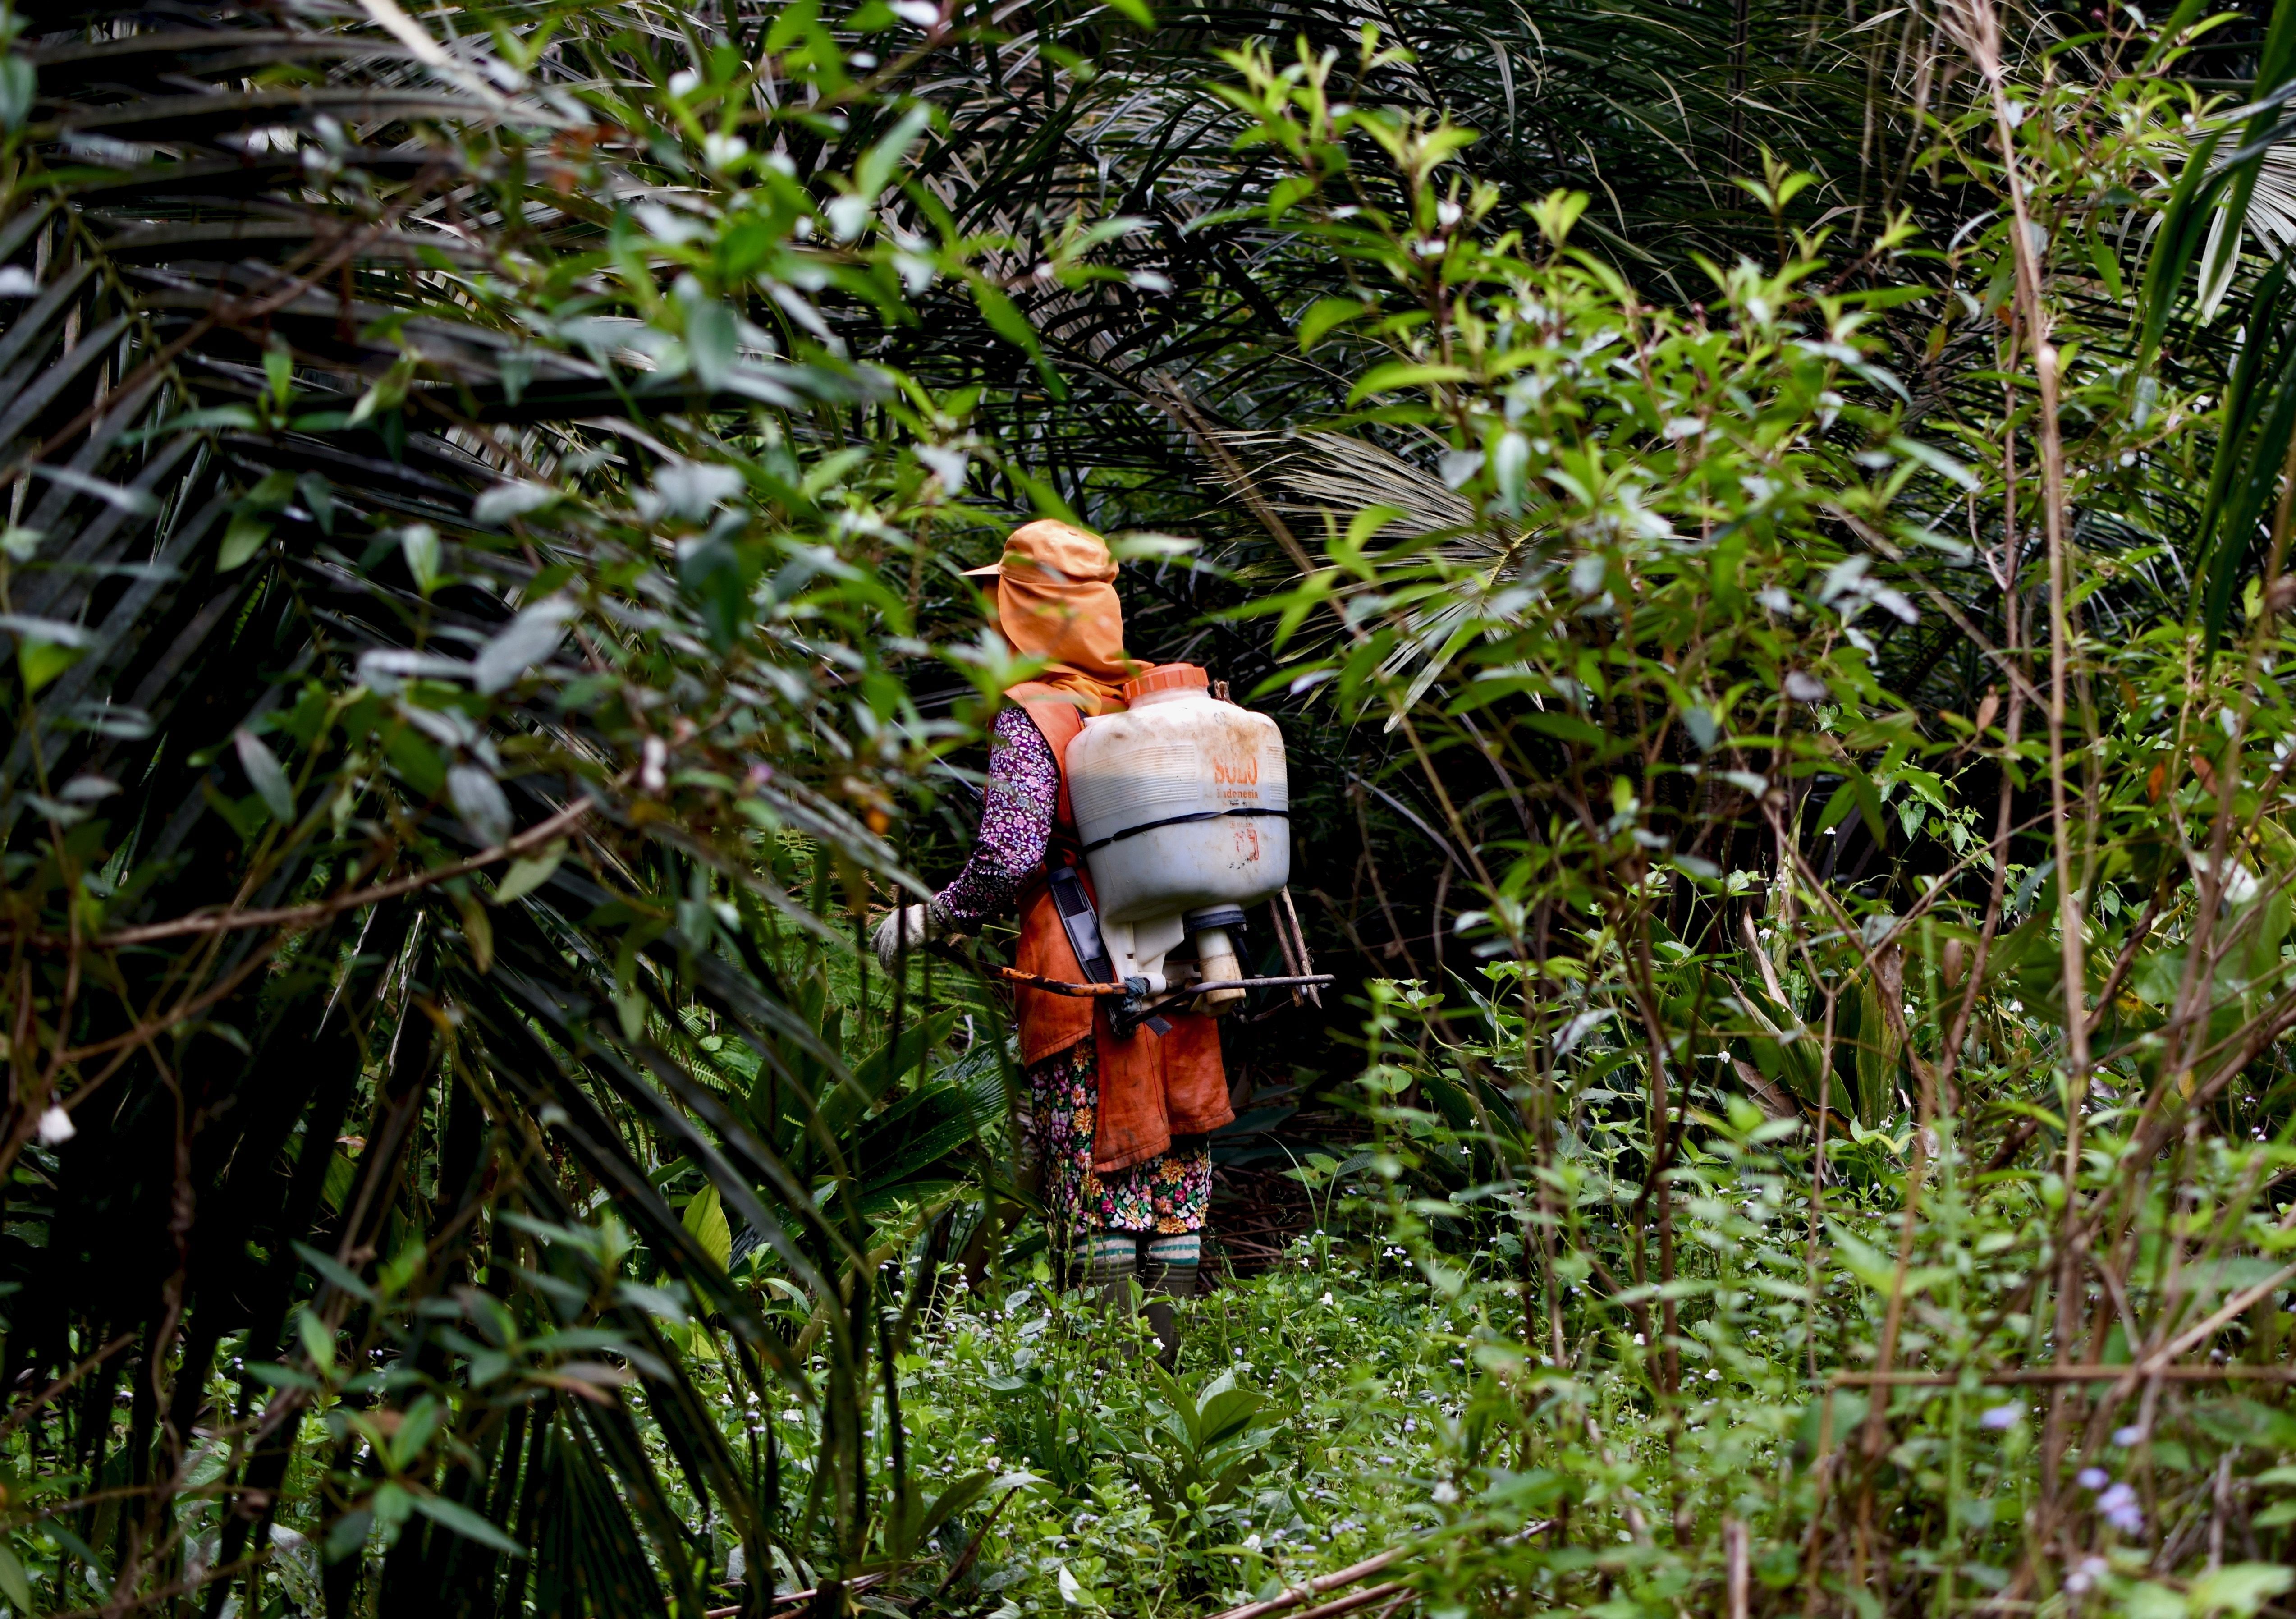 Women workers spray pesticides on an industrial plantation in Riau, Indonesia. Image by Wudan Yan. Indonesia, 2017.